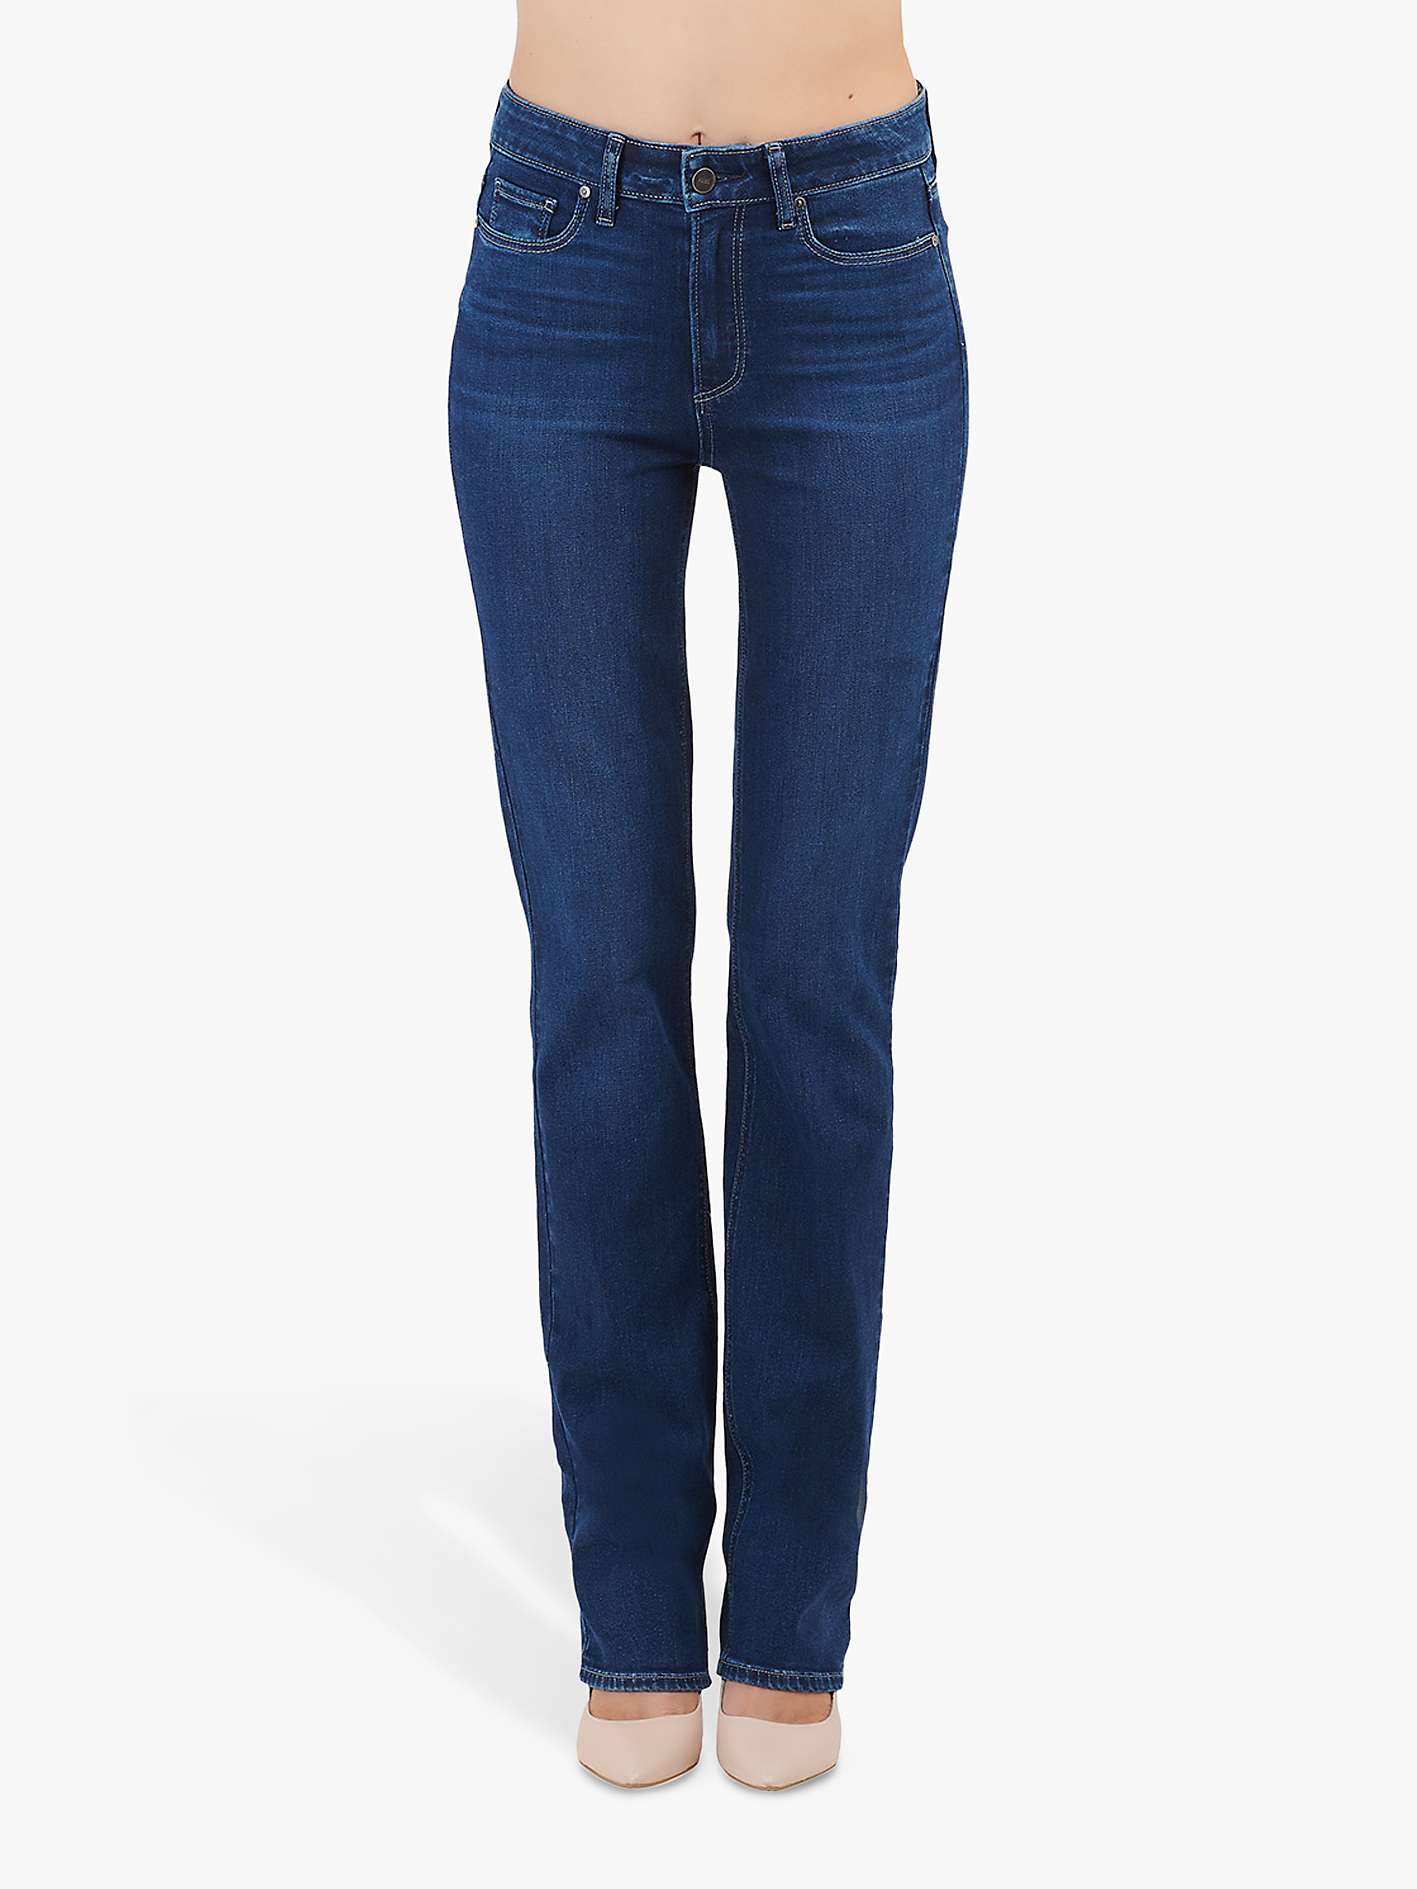 Buy PAIGE Hoxton High Rise Straight Leg Jeans, Brentwood Mid Wash Online at johnlewis.com